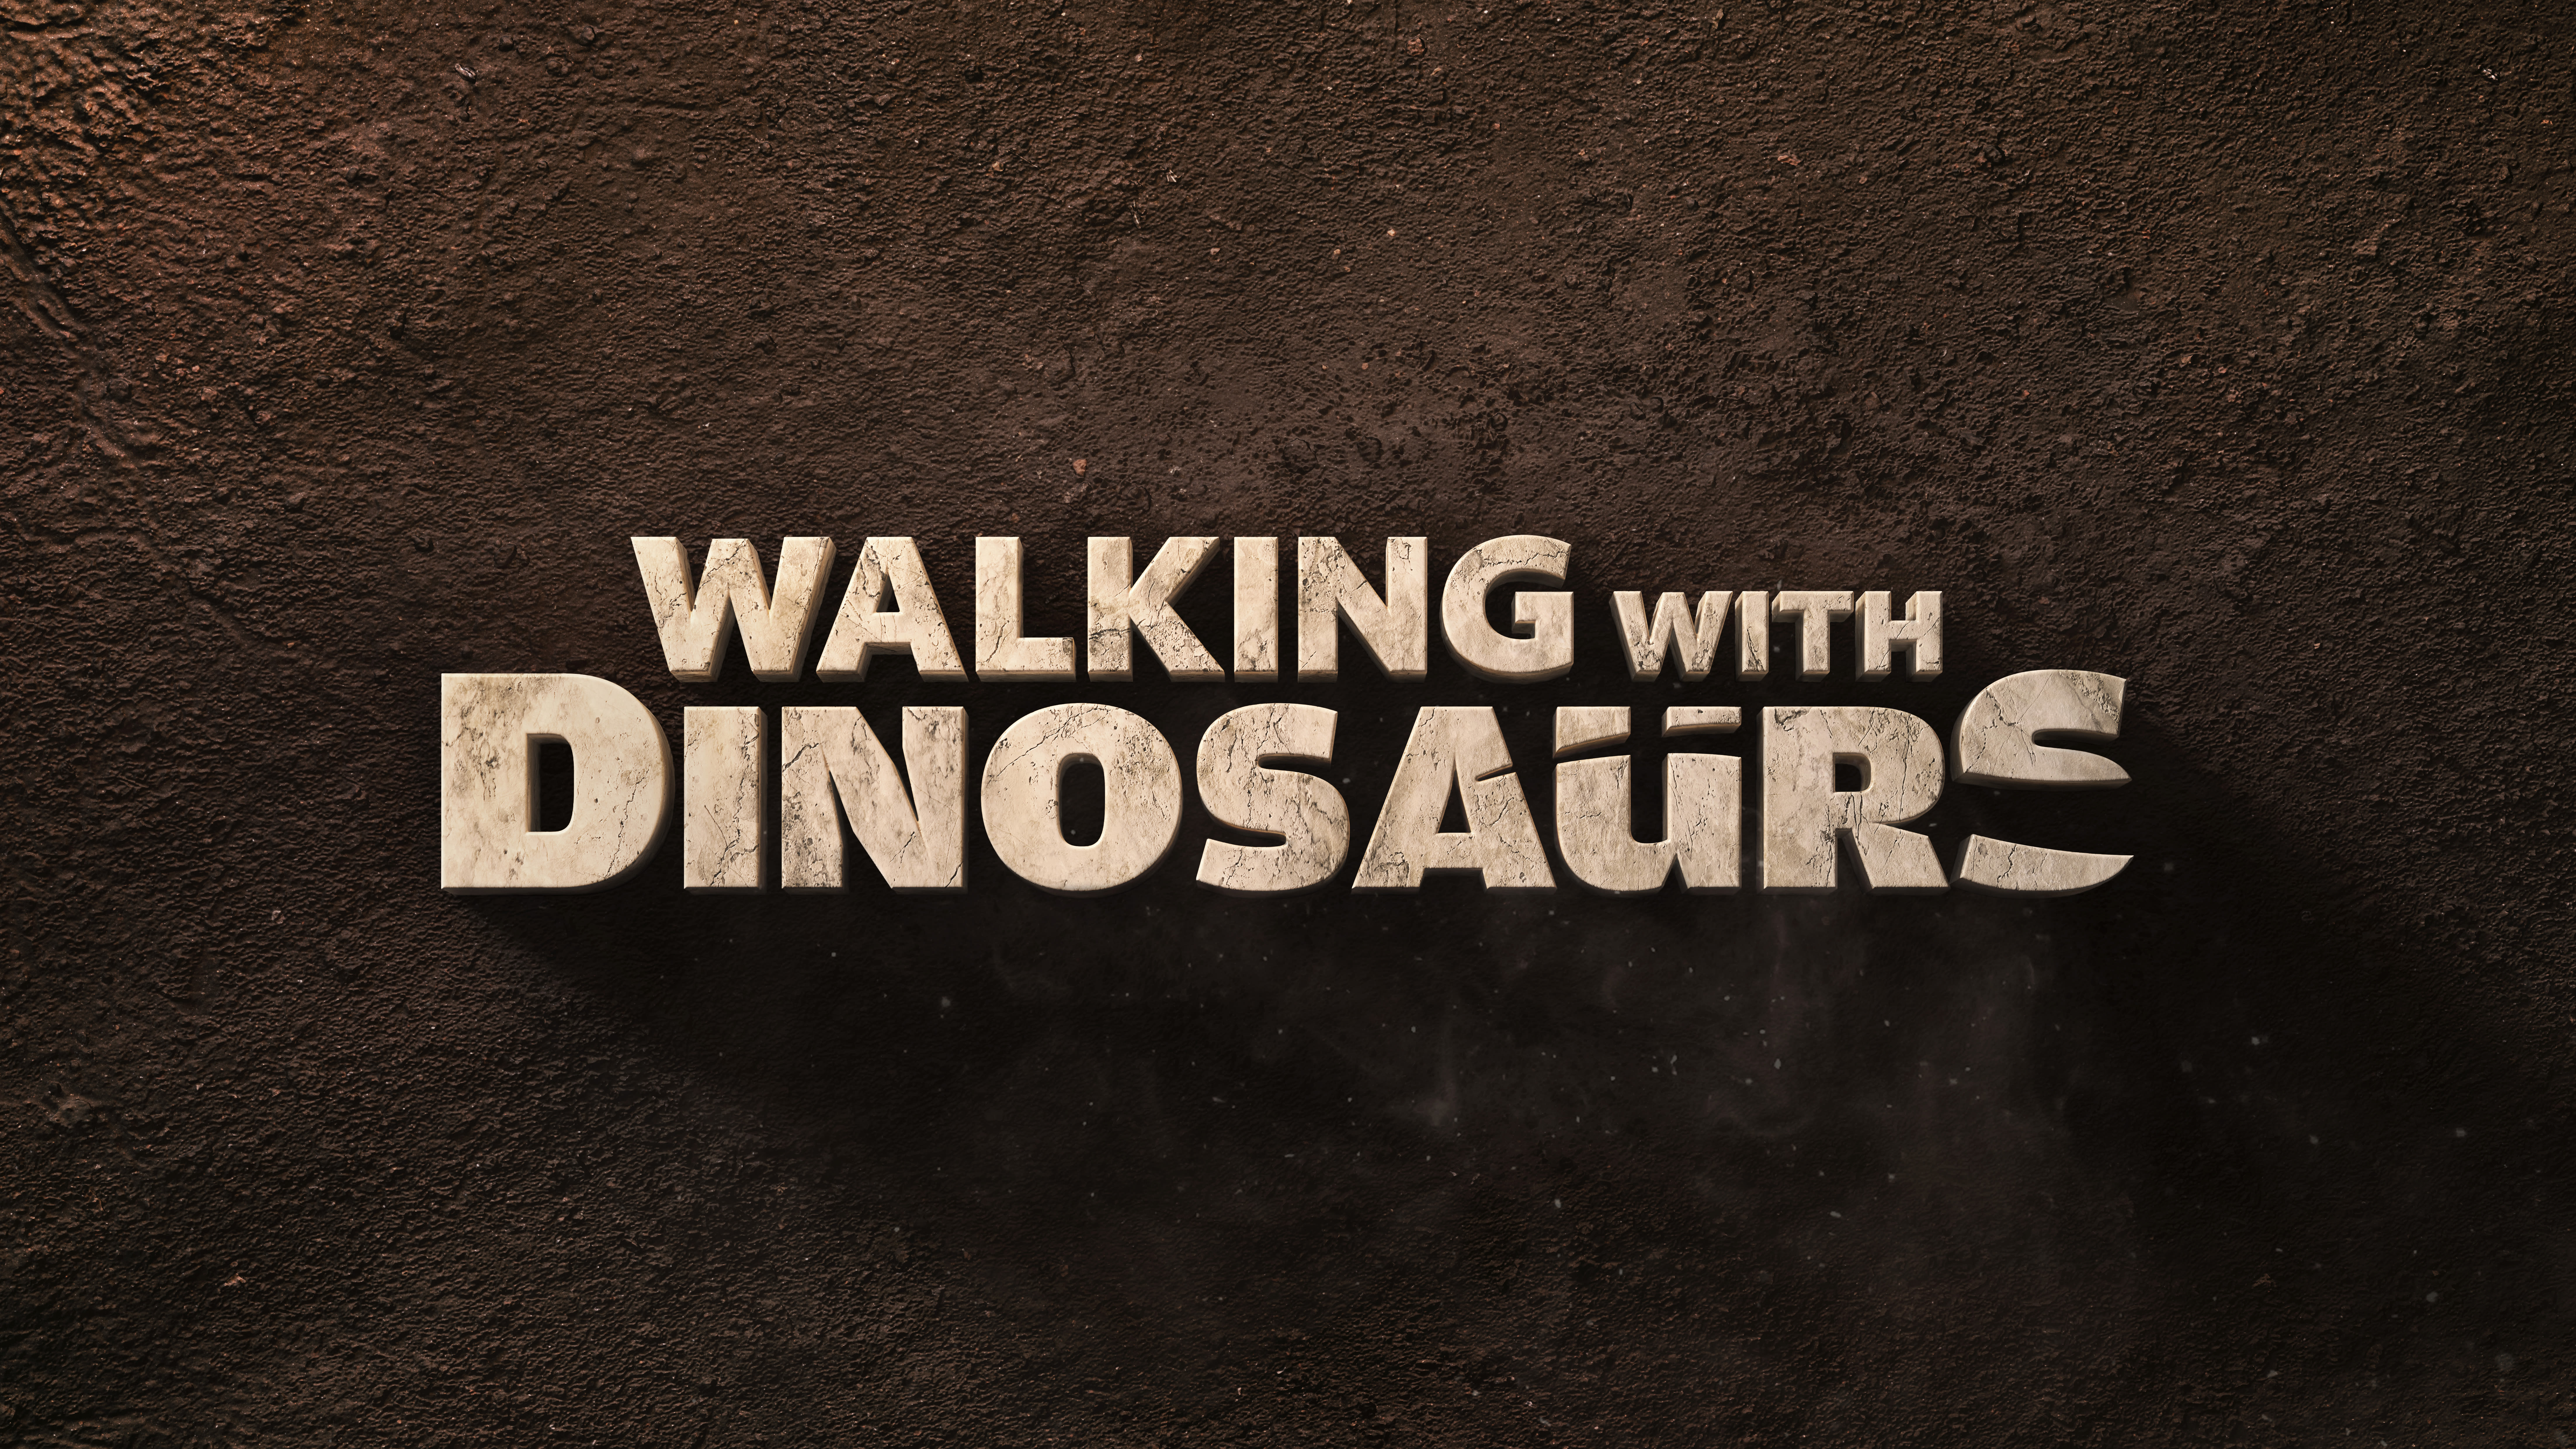 ‘Walking With Dinosaurs’ Returning To BBC & PBS After 25 Years